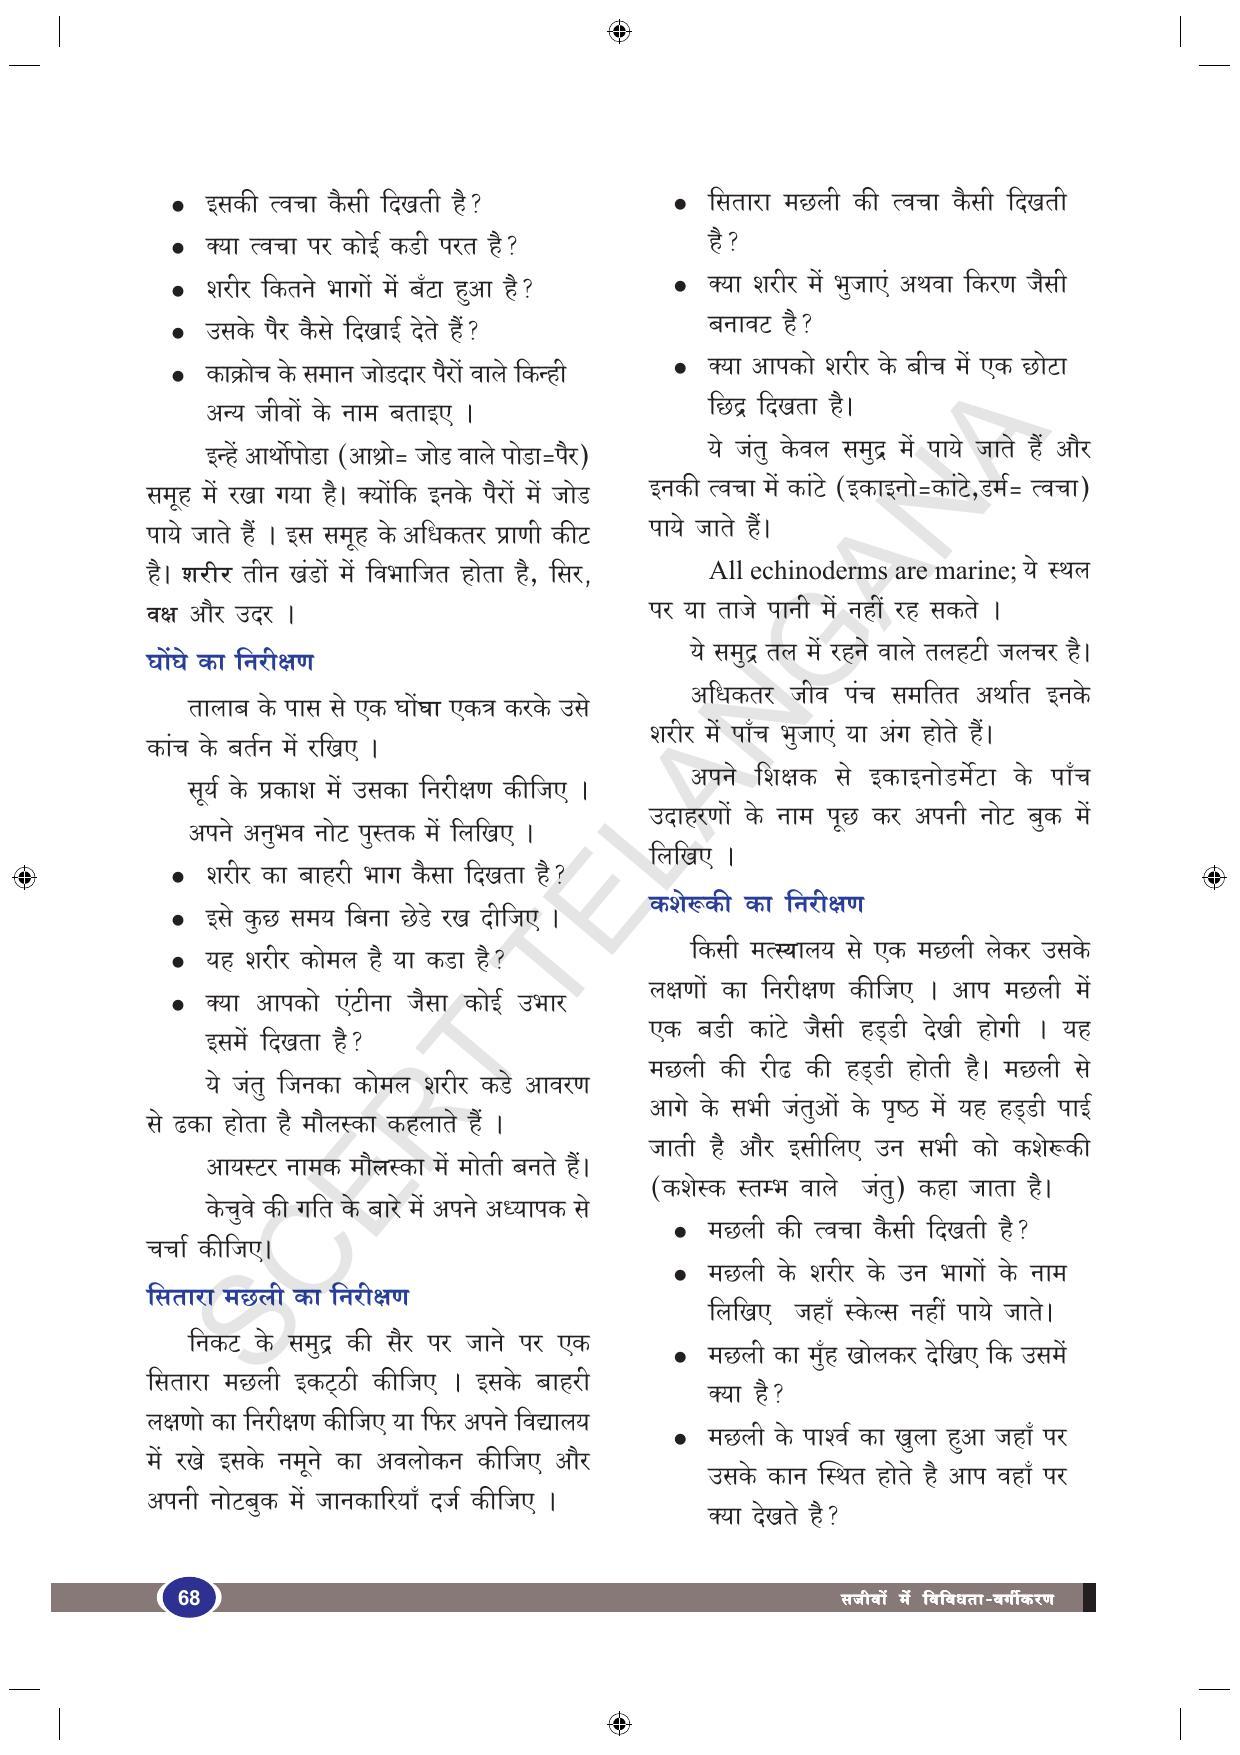 TS SCERT Class 9 Biological Science (Hindi Medium) Text Book - Page 80